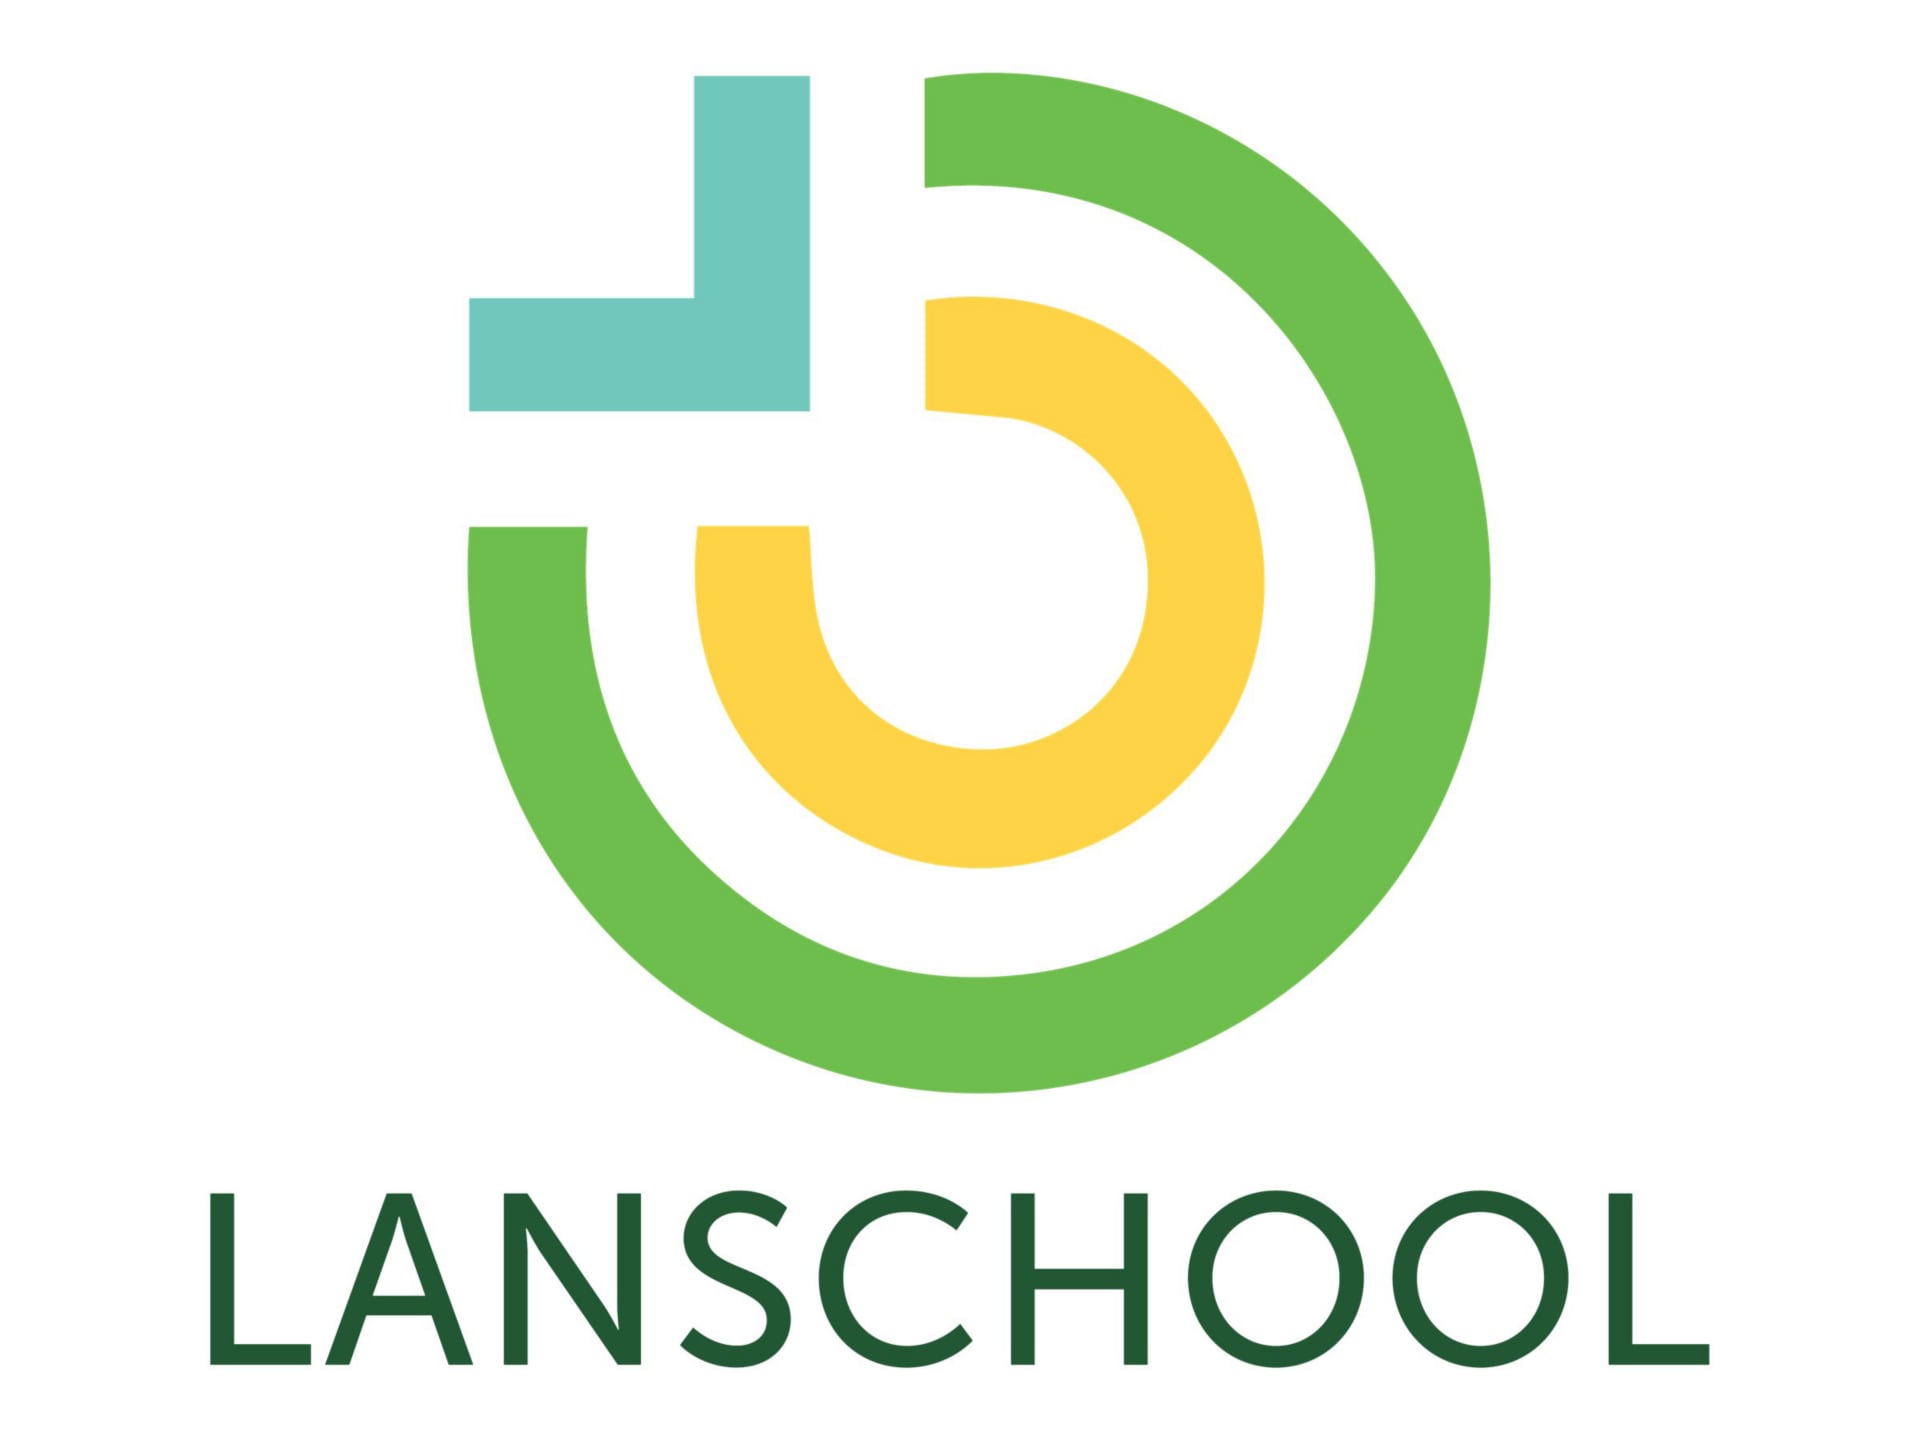 LanSchool - subscription license (4 years) + Technical Support - 1 device